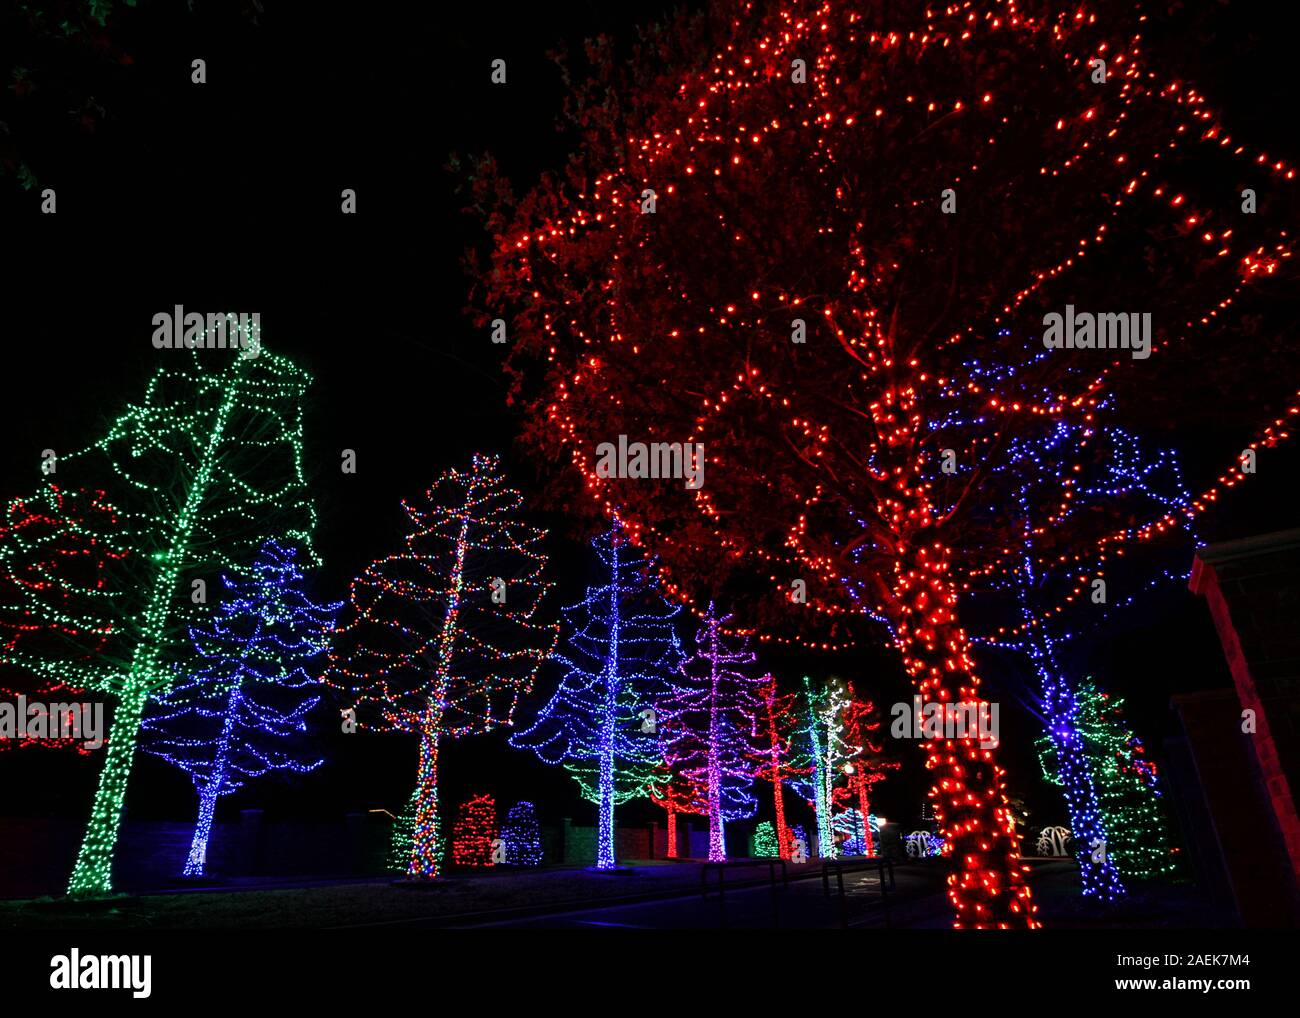 A group of trees with colorful holiday lights at night. Stock Photo